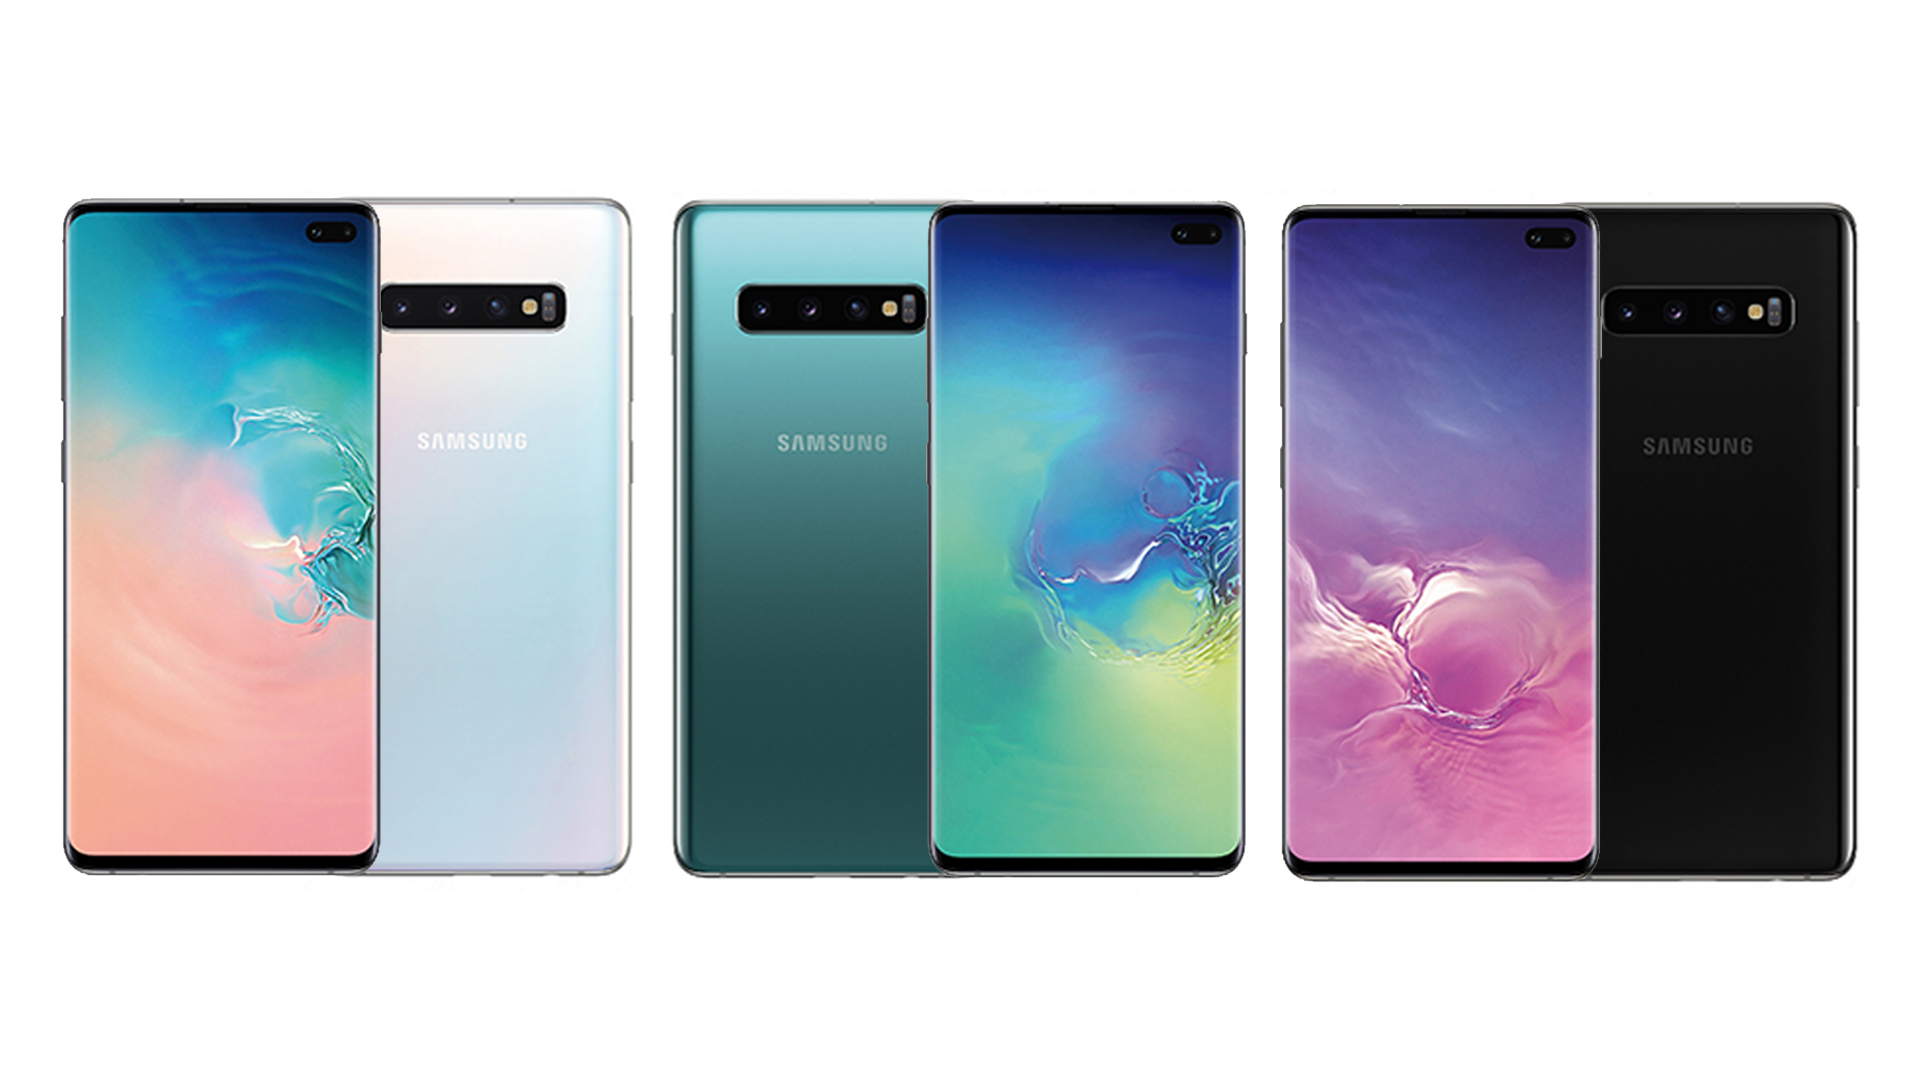 Samsung Galaxy S10 Plus No Watermarks - announced at Mobile World Congress 2019